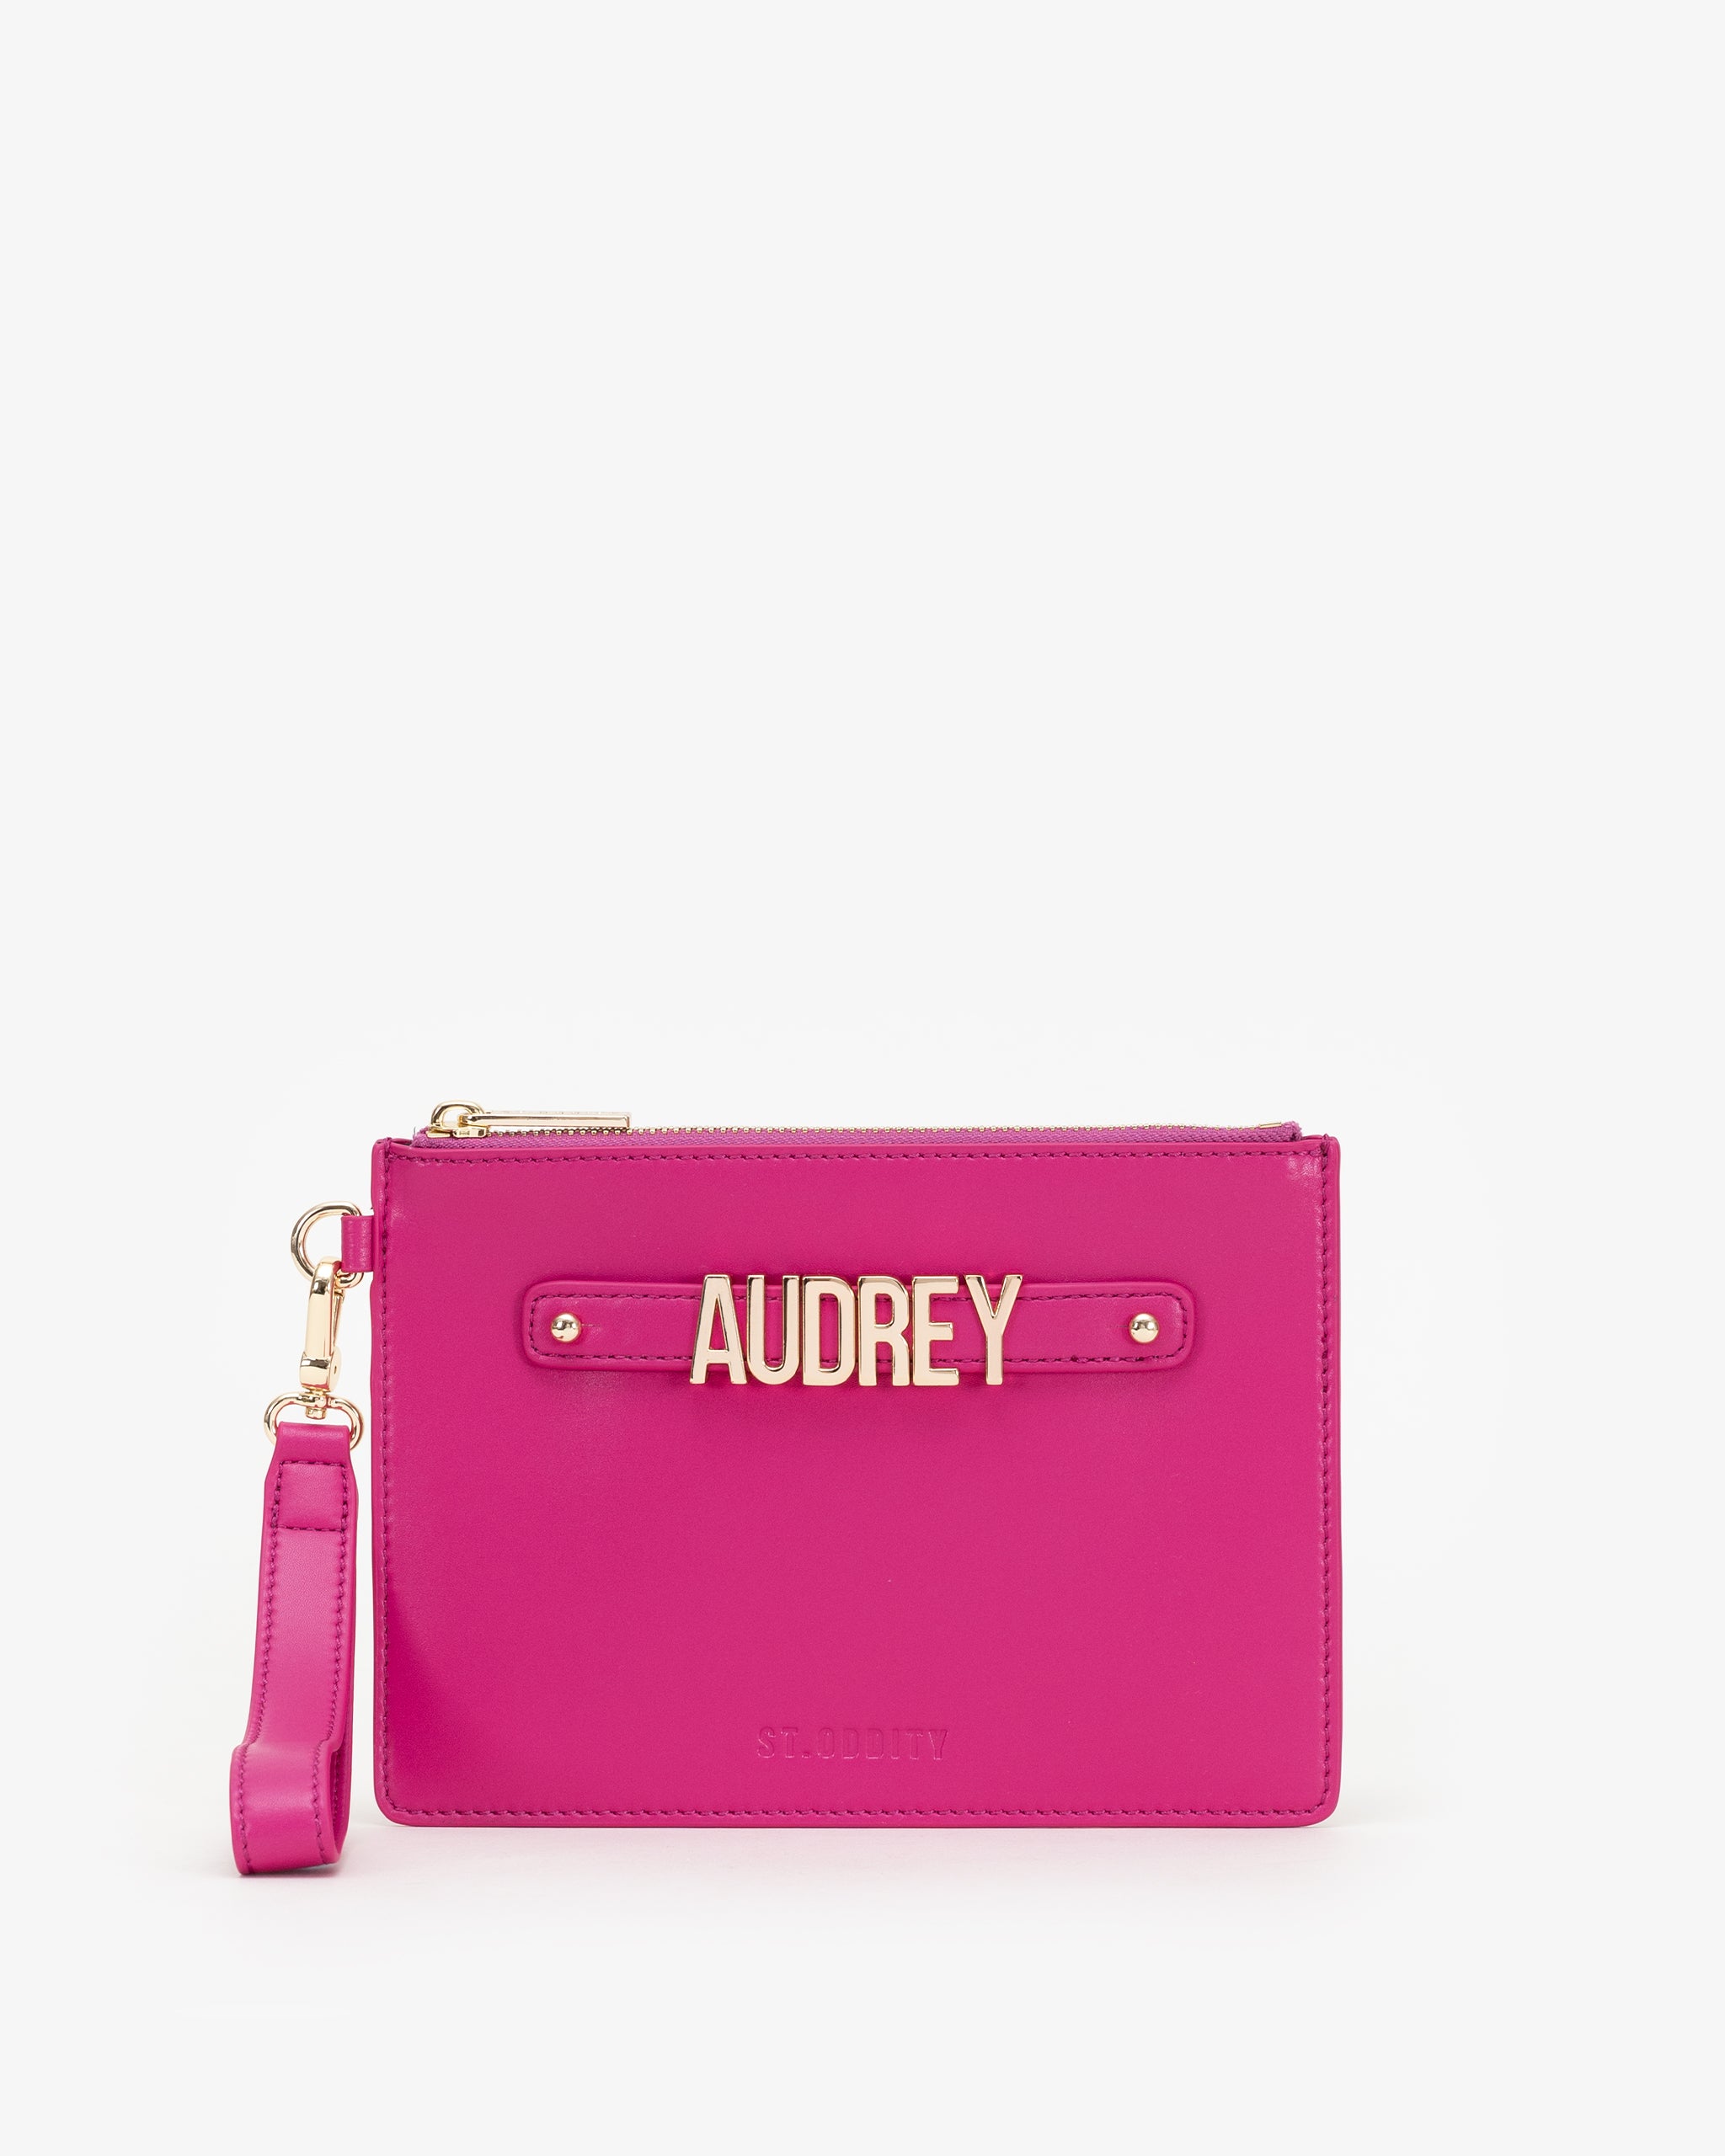 Pre-order (Mid-May): Classic Pouch in Fuchsia with Personalised Hardware